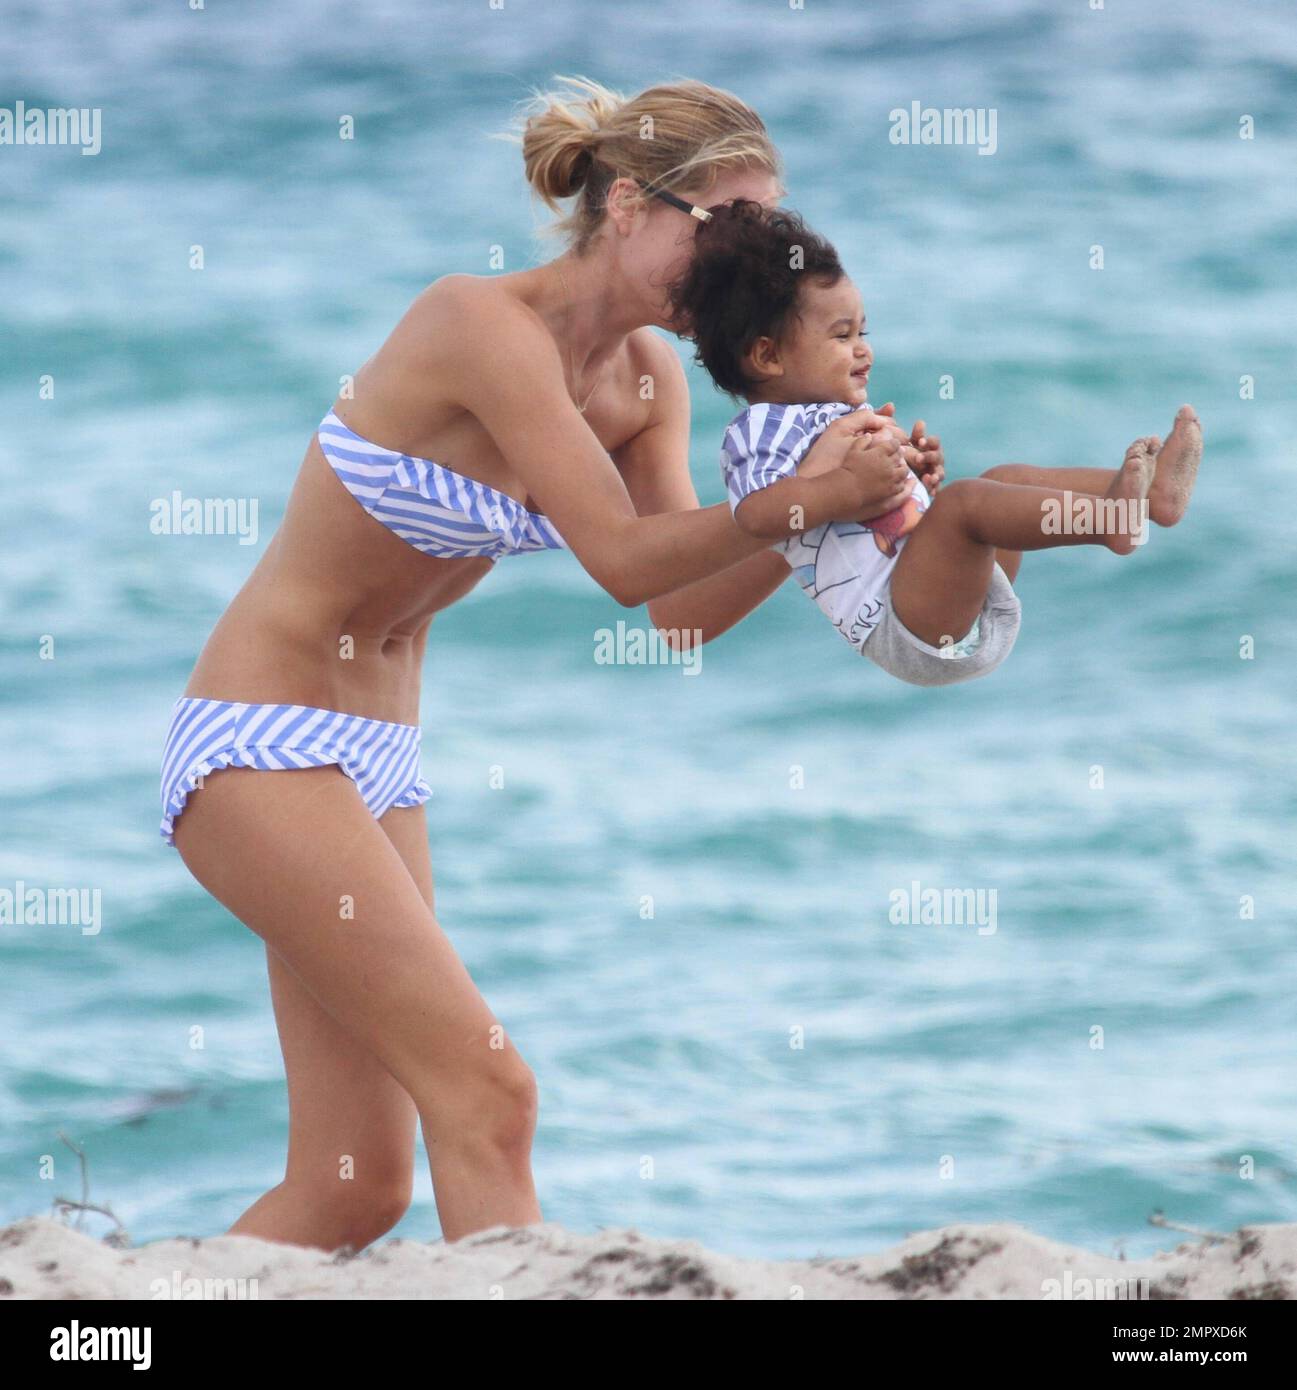 EXCLUSIVE!! Beautiful model mom, Doutzen Kroes, spends Valentines Day at  the beach with her infant son Phyllon Joy GorrŽ. The cute duo played in the  sand by the water's edge while Phyllon